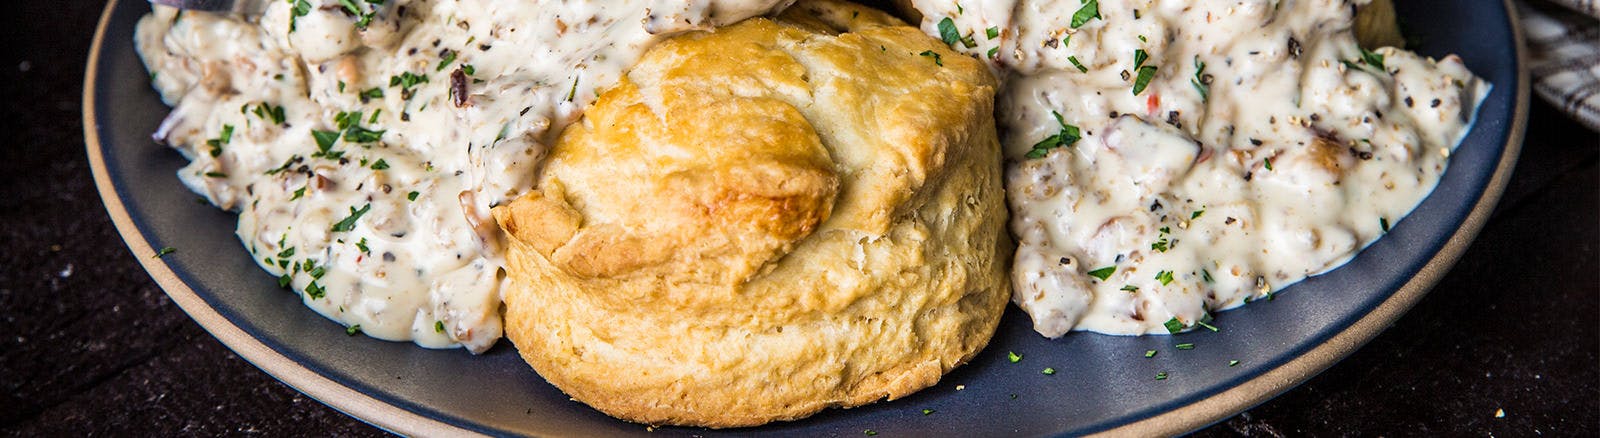 Biscuits and Smoked Sausage Gravy